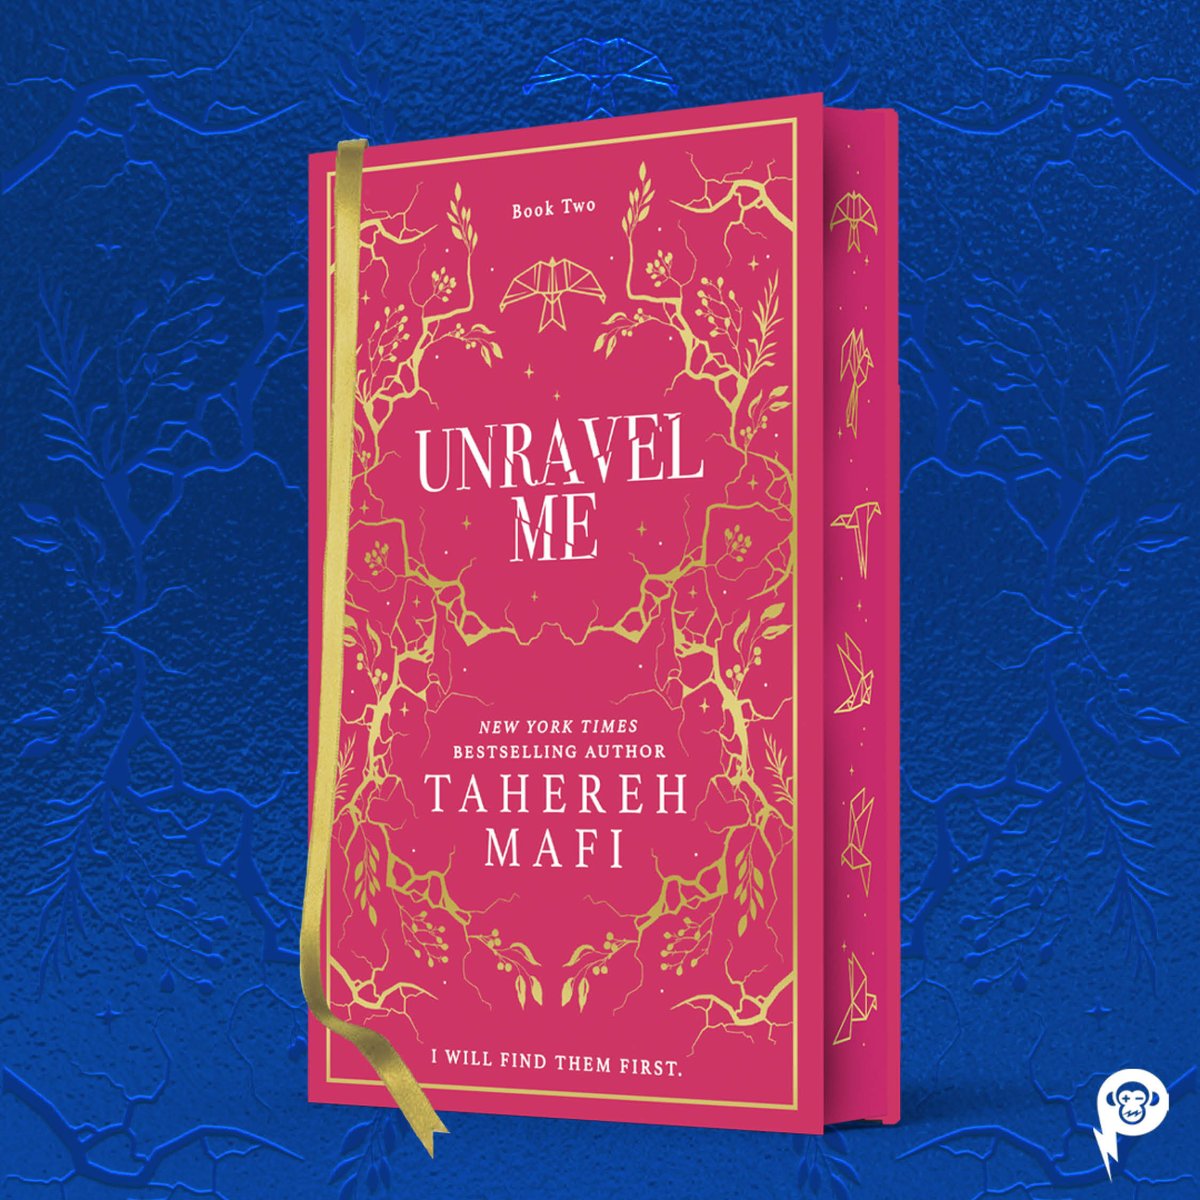 Happy pub day to this beauty! The collector's edition of Unravel Me is out today, the second book in Tahereh Mafi's Shatter Me series. Whether you're a series super-fan or it's on your TBR - this is the universe telling you that this is your moment ✨ ow.ly/llUm50RAbpb